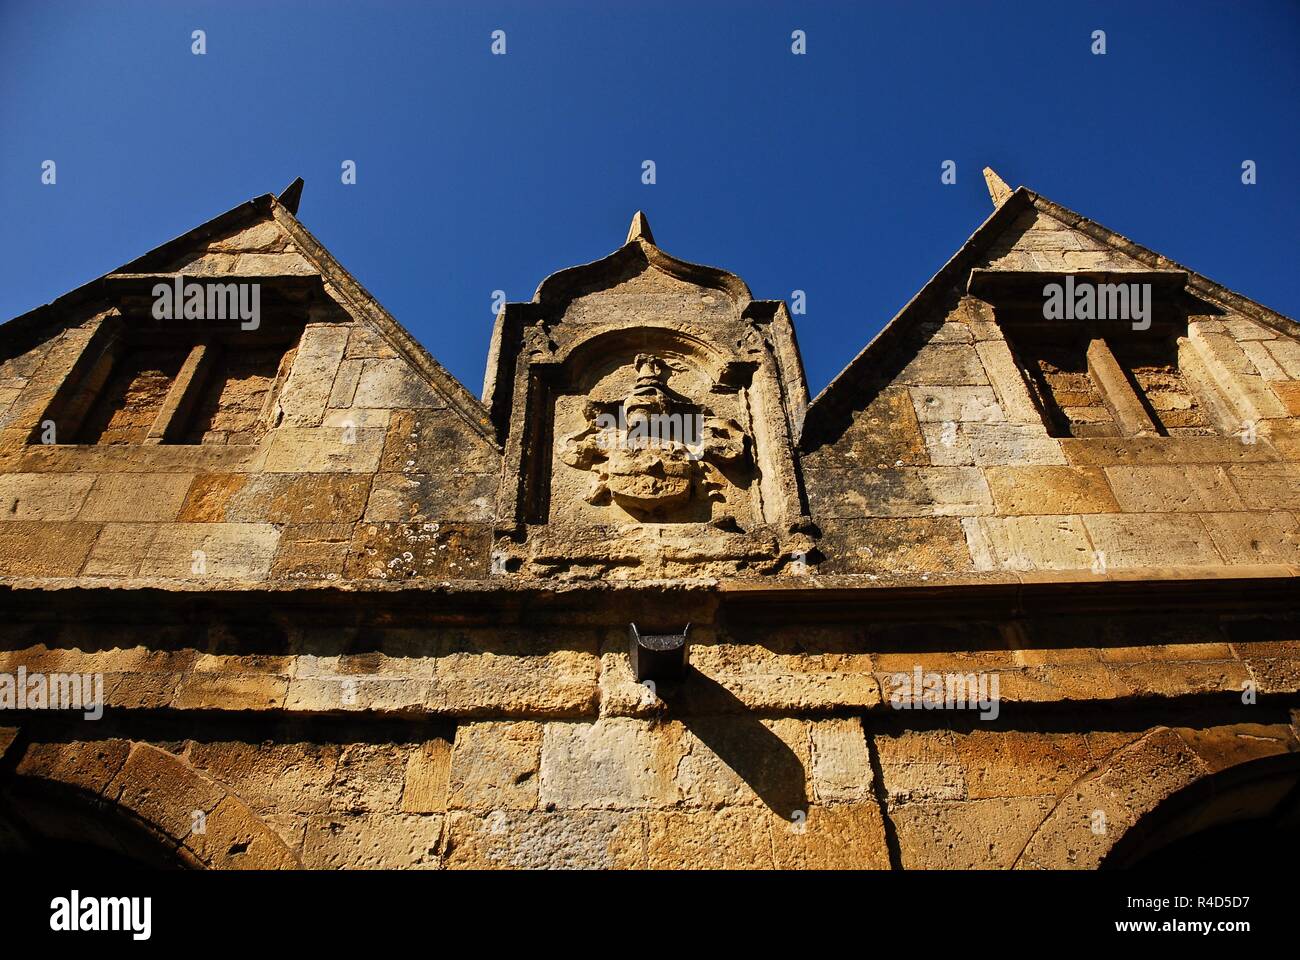 Cotswold stone buildings in the market town of Chipping Campden, Cotswolds, Gloucestershire, UK Stock Photo